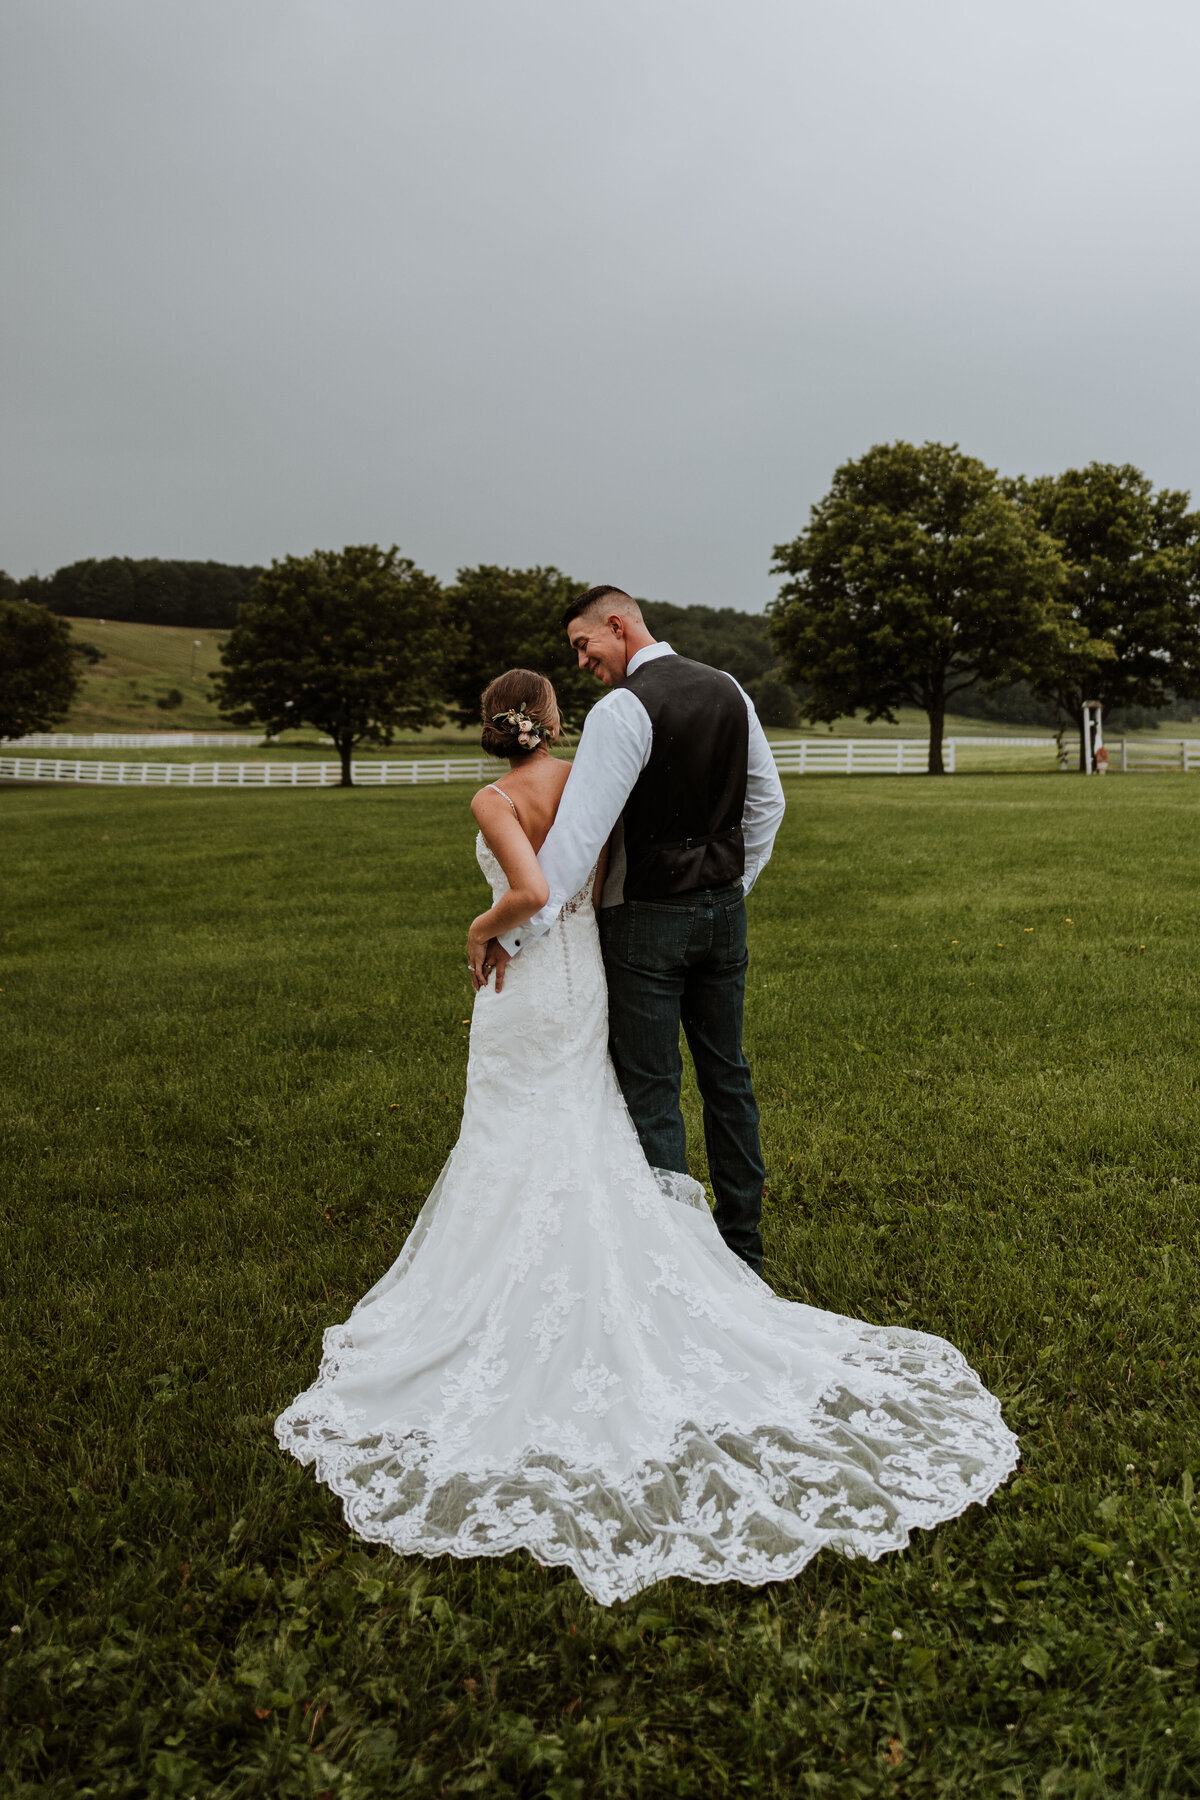 Donna Marie Photo Co. | Watertown, NY Wedding Photographer